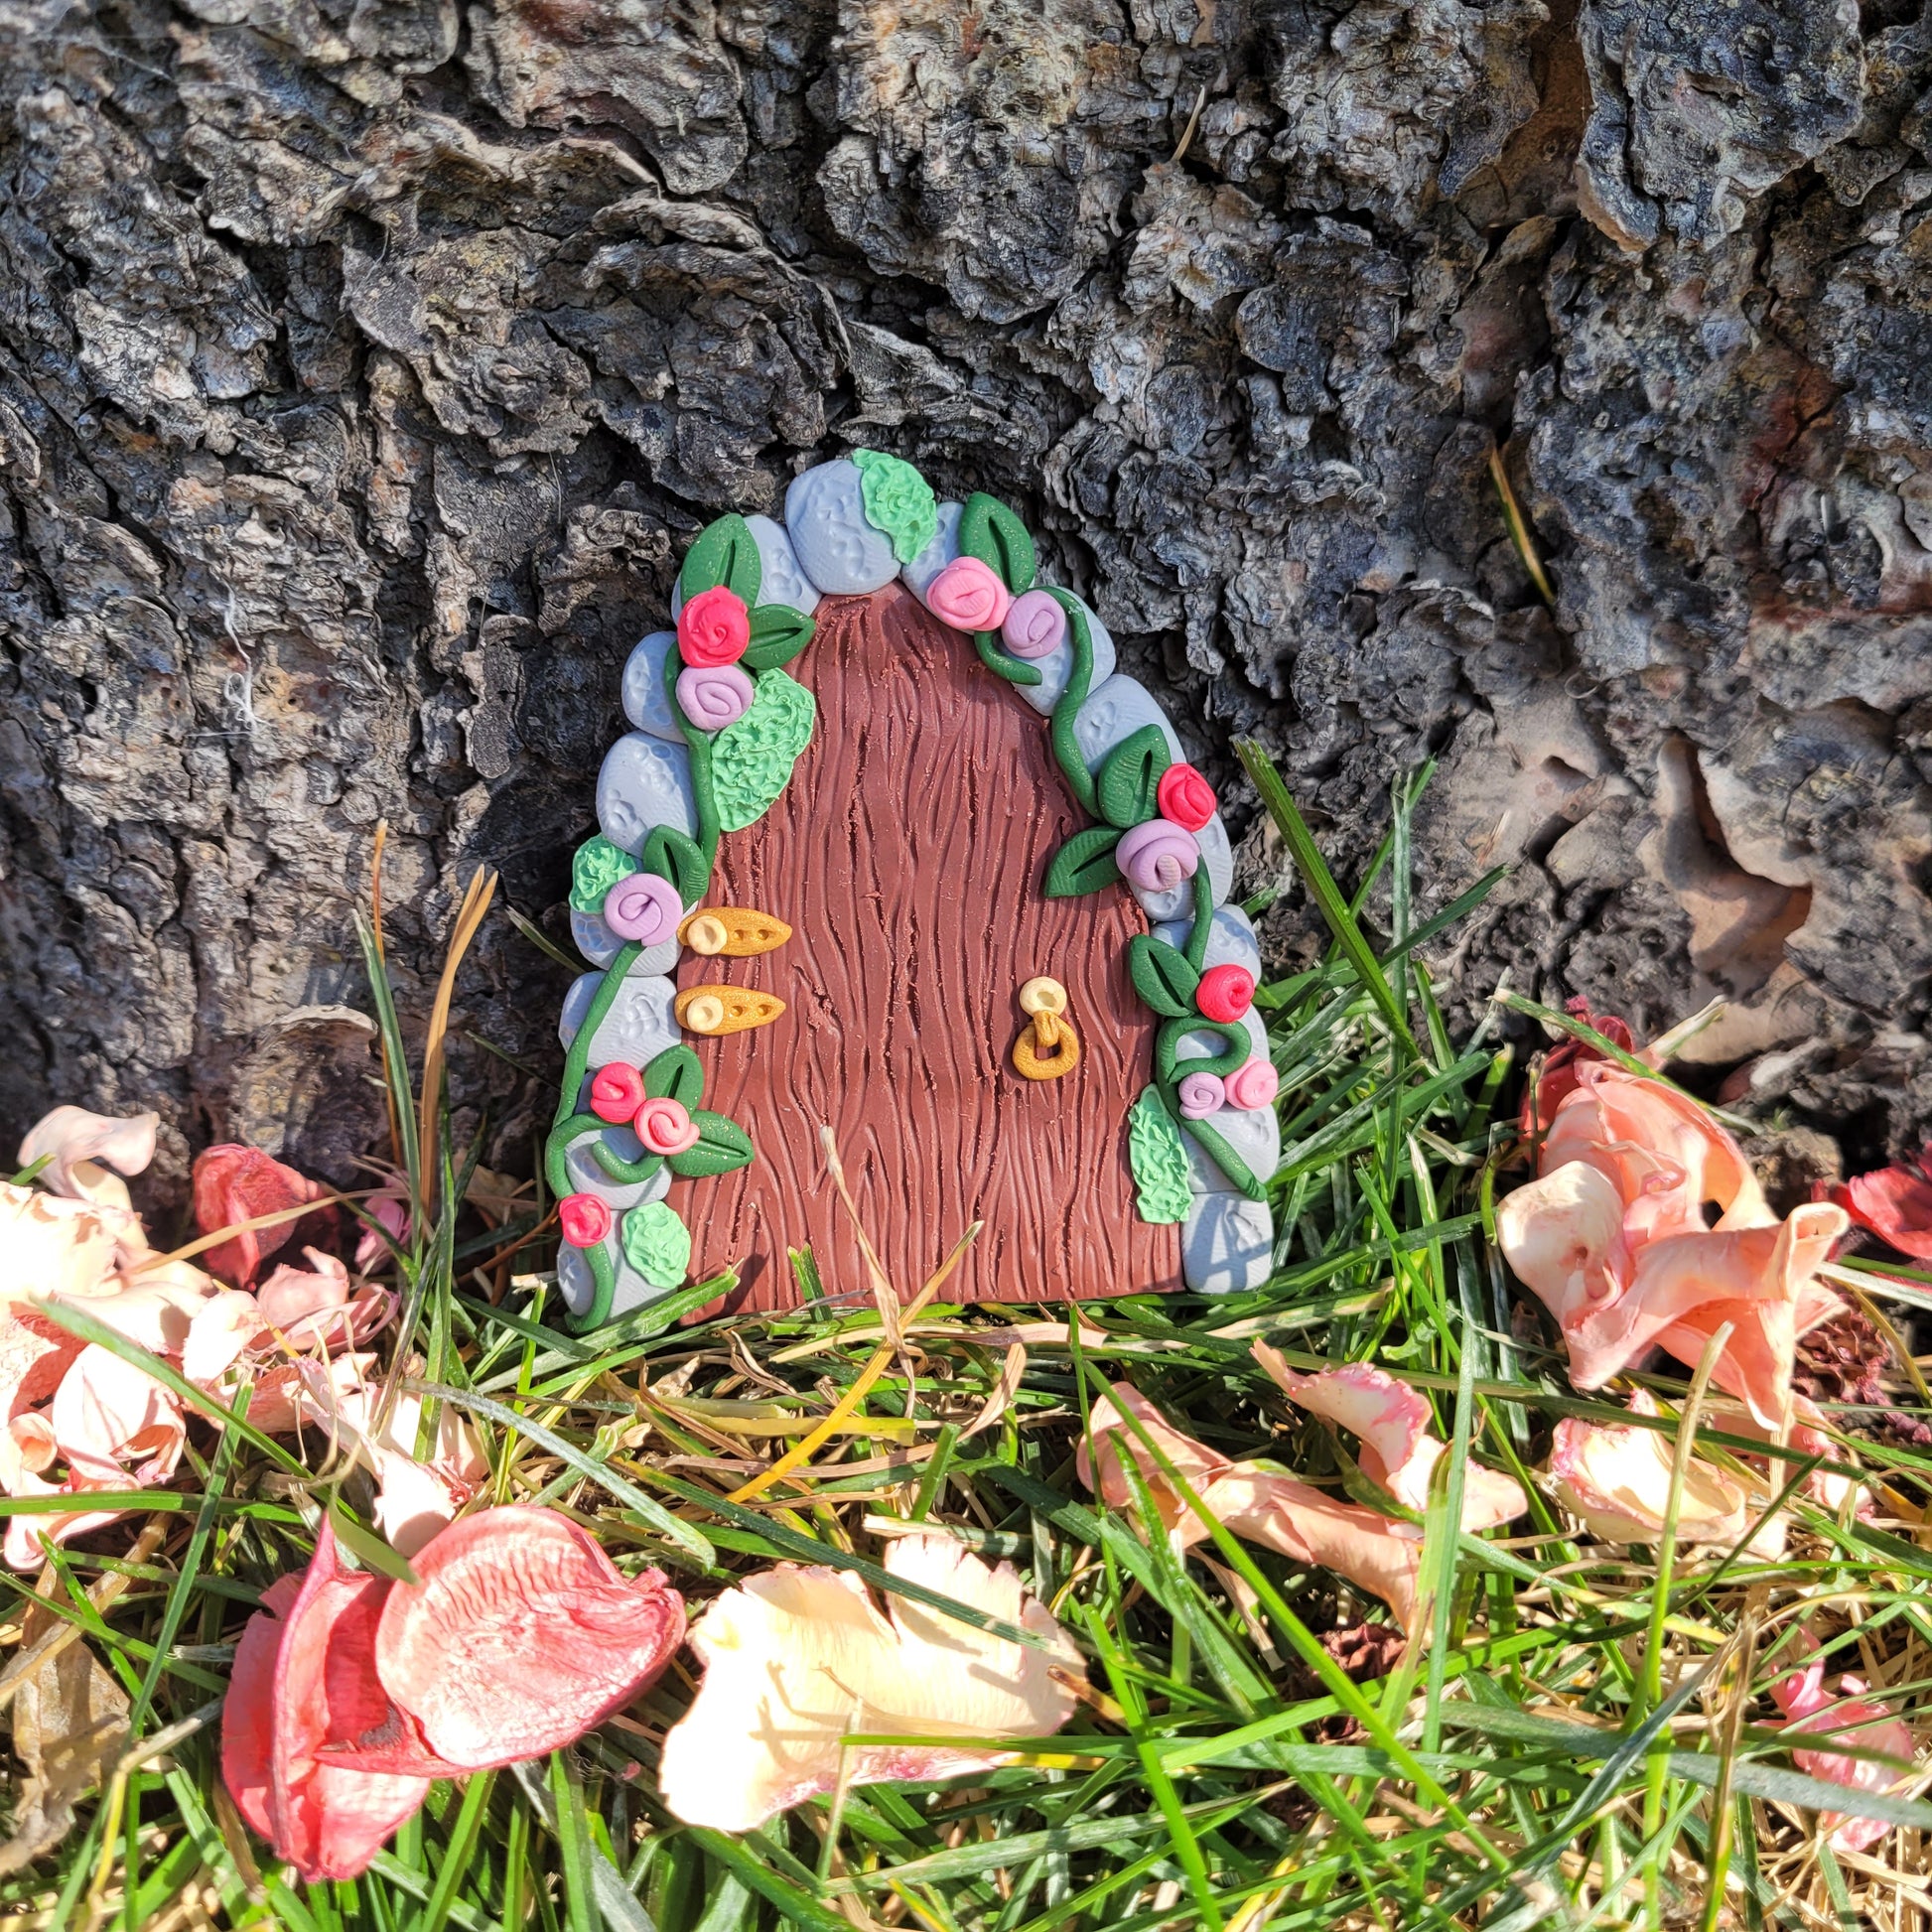 The fairy door rests against the bark of a tree outside surrounded by green grass and pink flower petals. The secret garden door is a maroon wood pattern with grey cobblestone finish and gold hinges and door handle. It is detailed with green vines and pink and purple flowers.